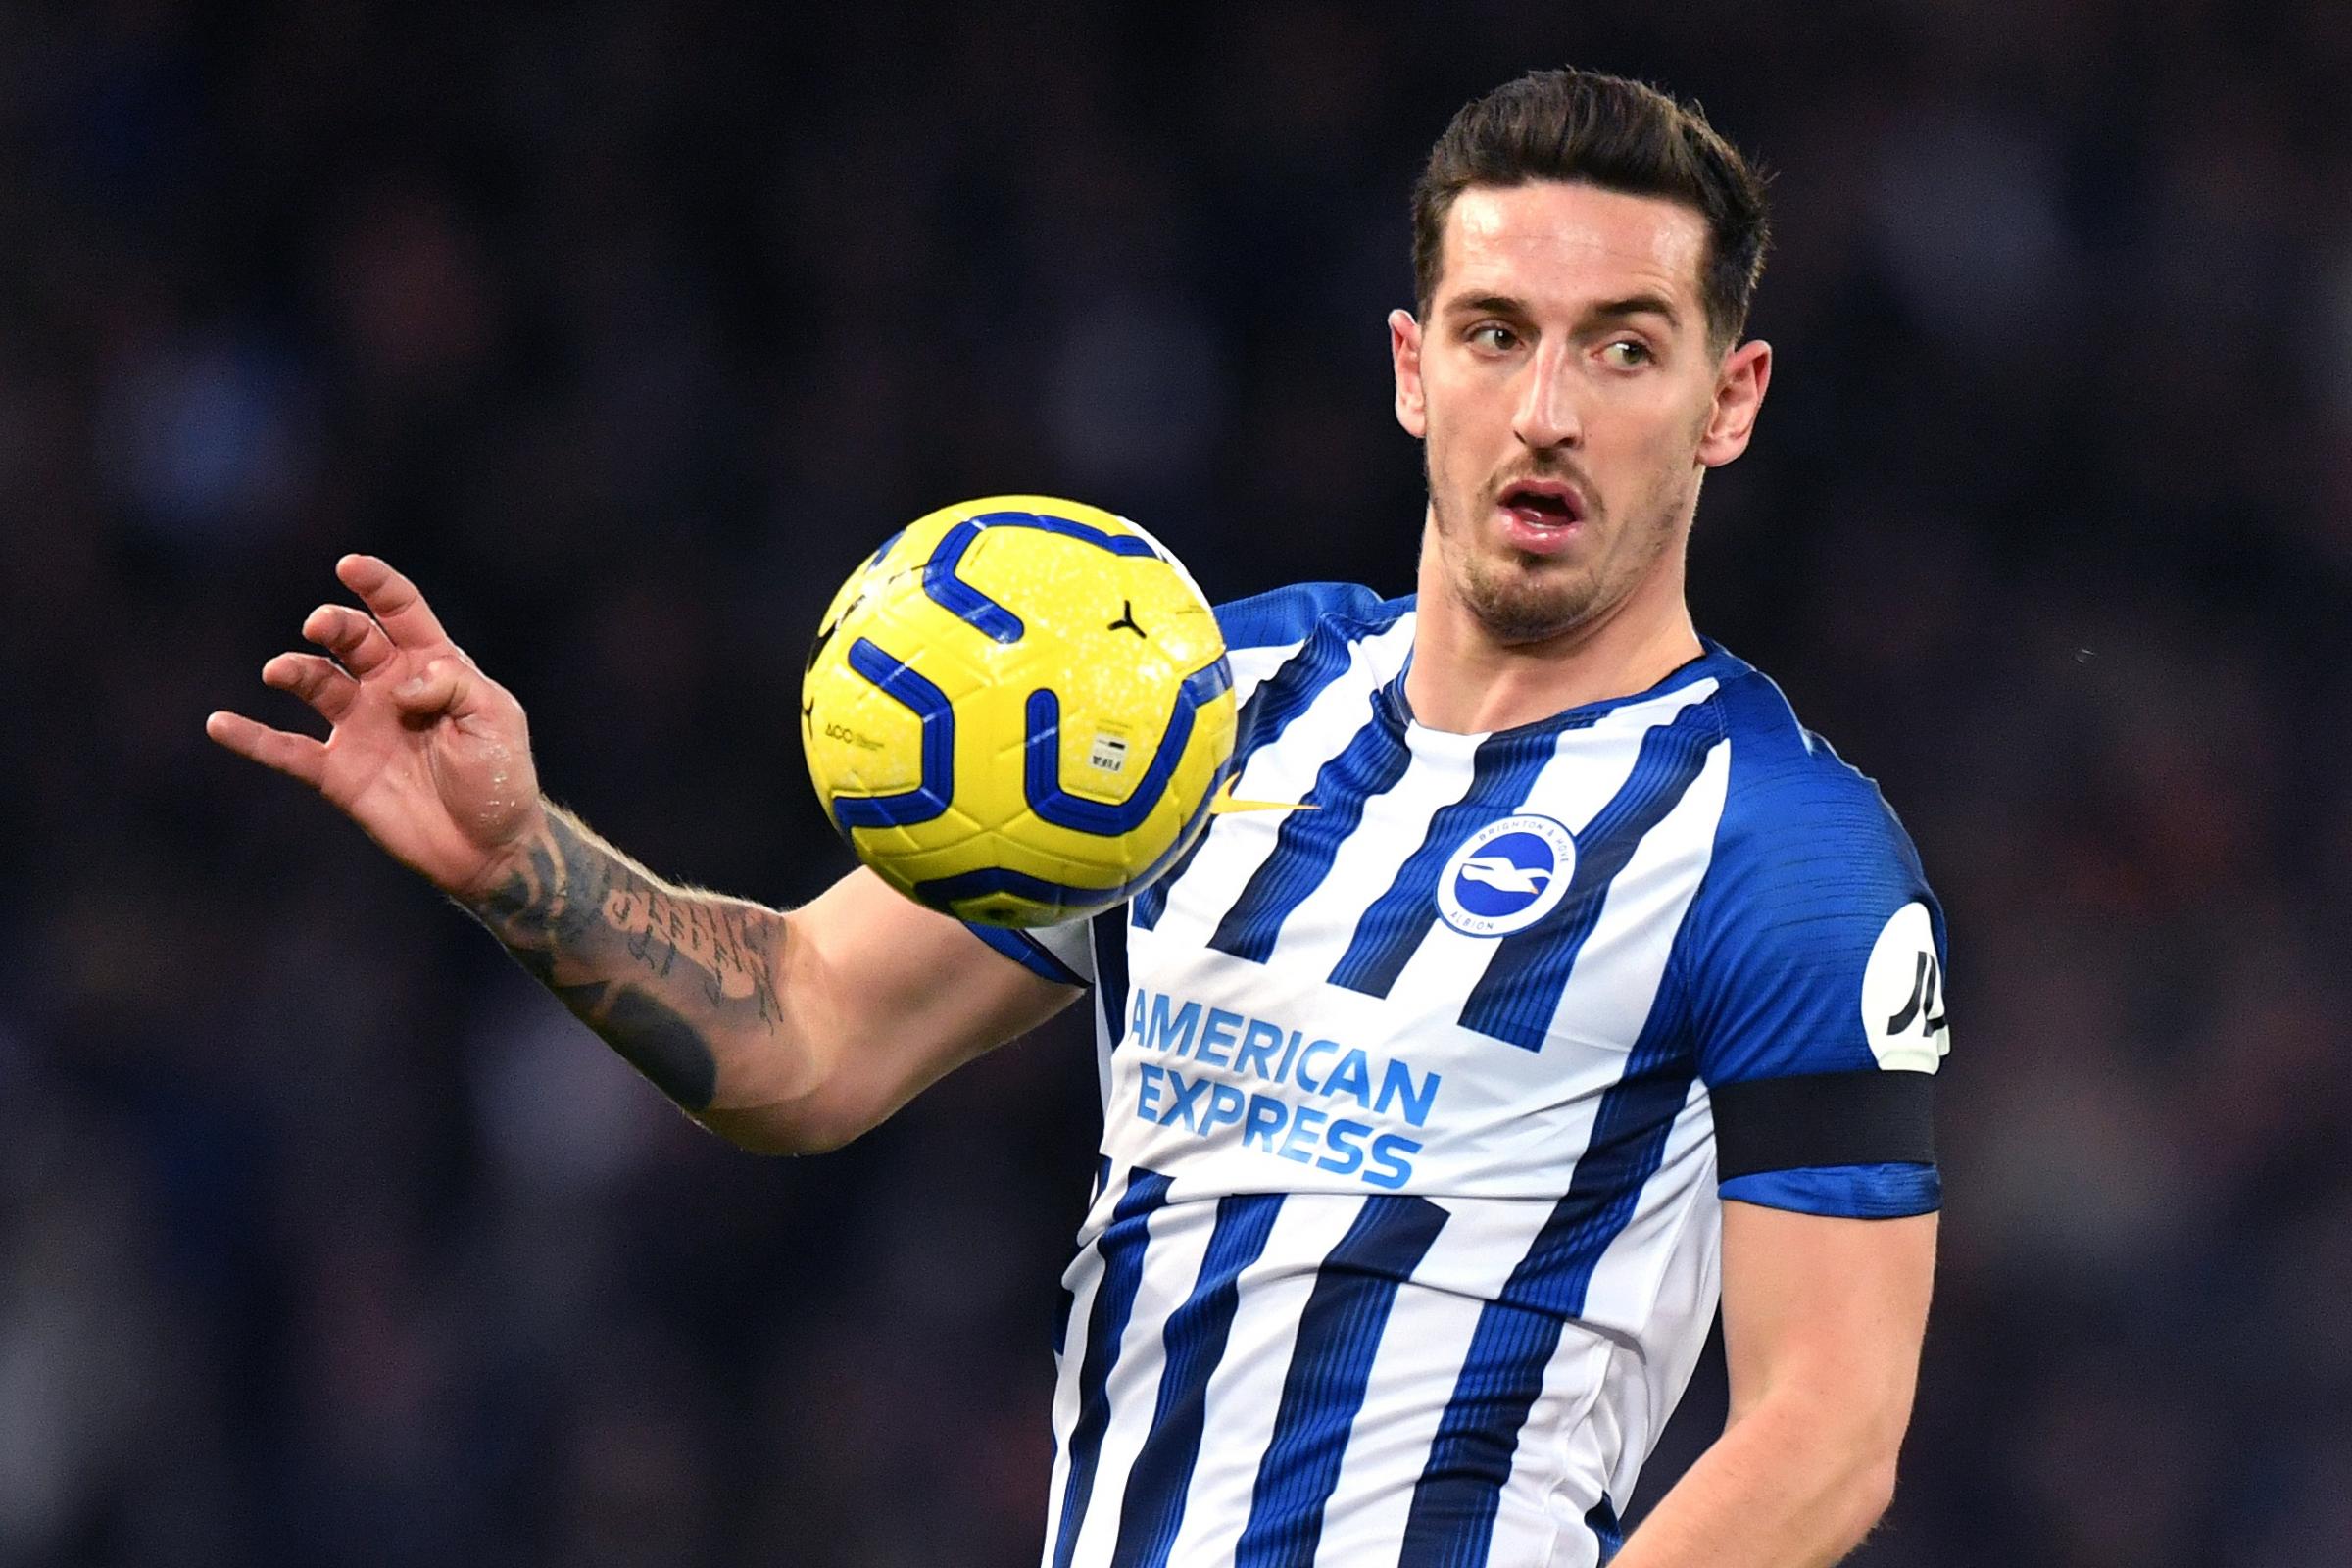 Transfer news: Odds on Lewis Dunk to Chelsea drop